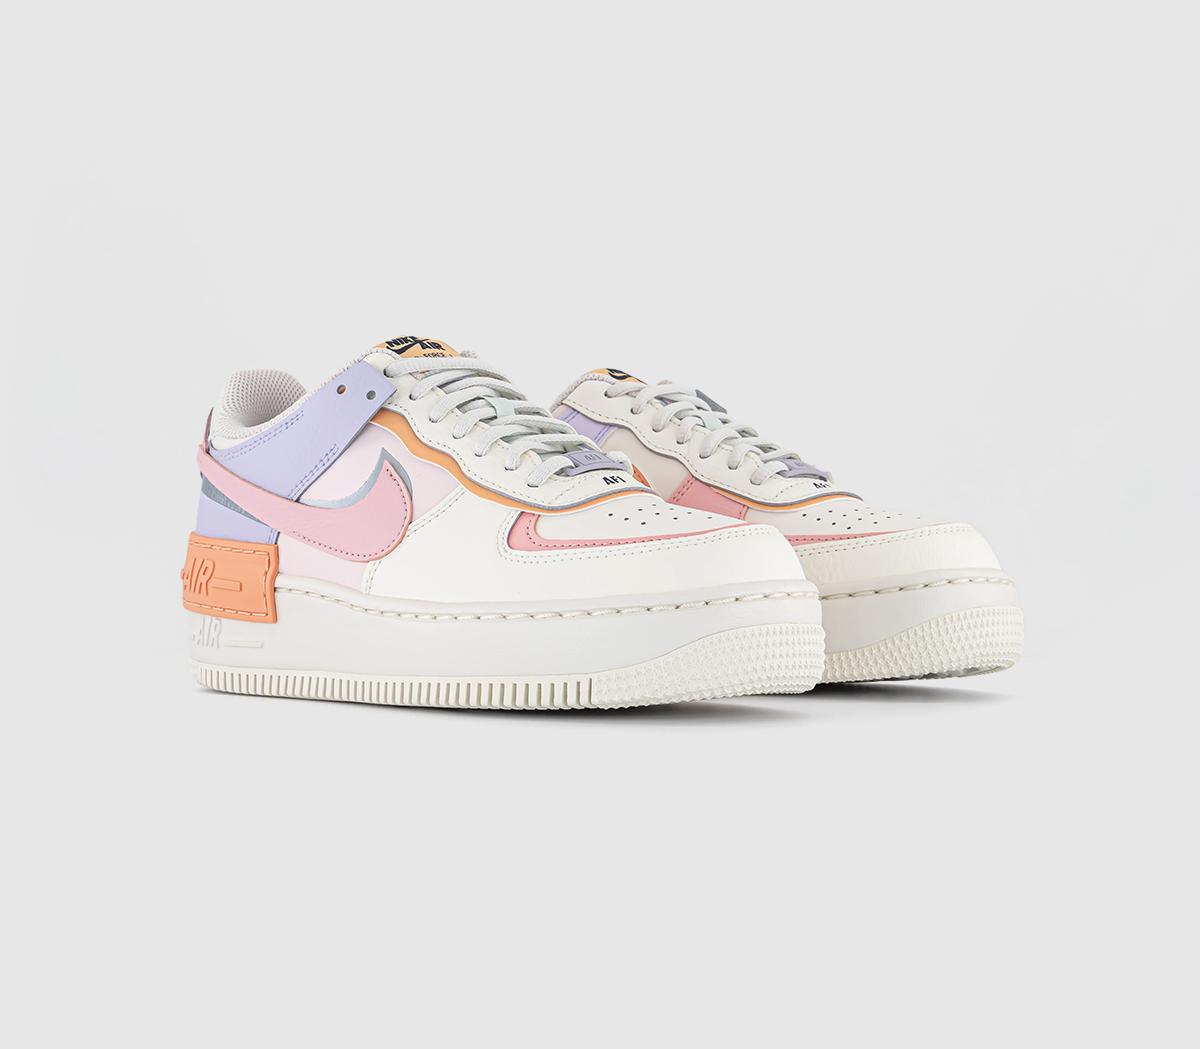 Nike Womens Air Force 1 Shadow Trainers Sail Pink Orange Chalk Obsidian Soft Barely G, 7